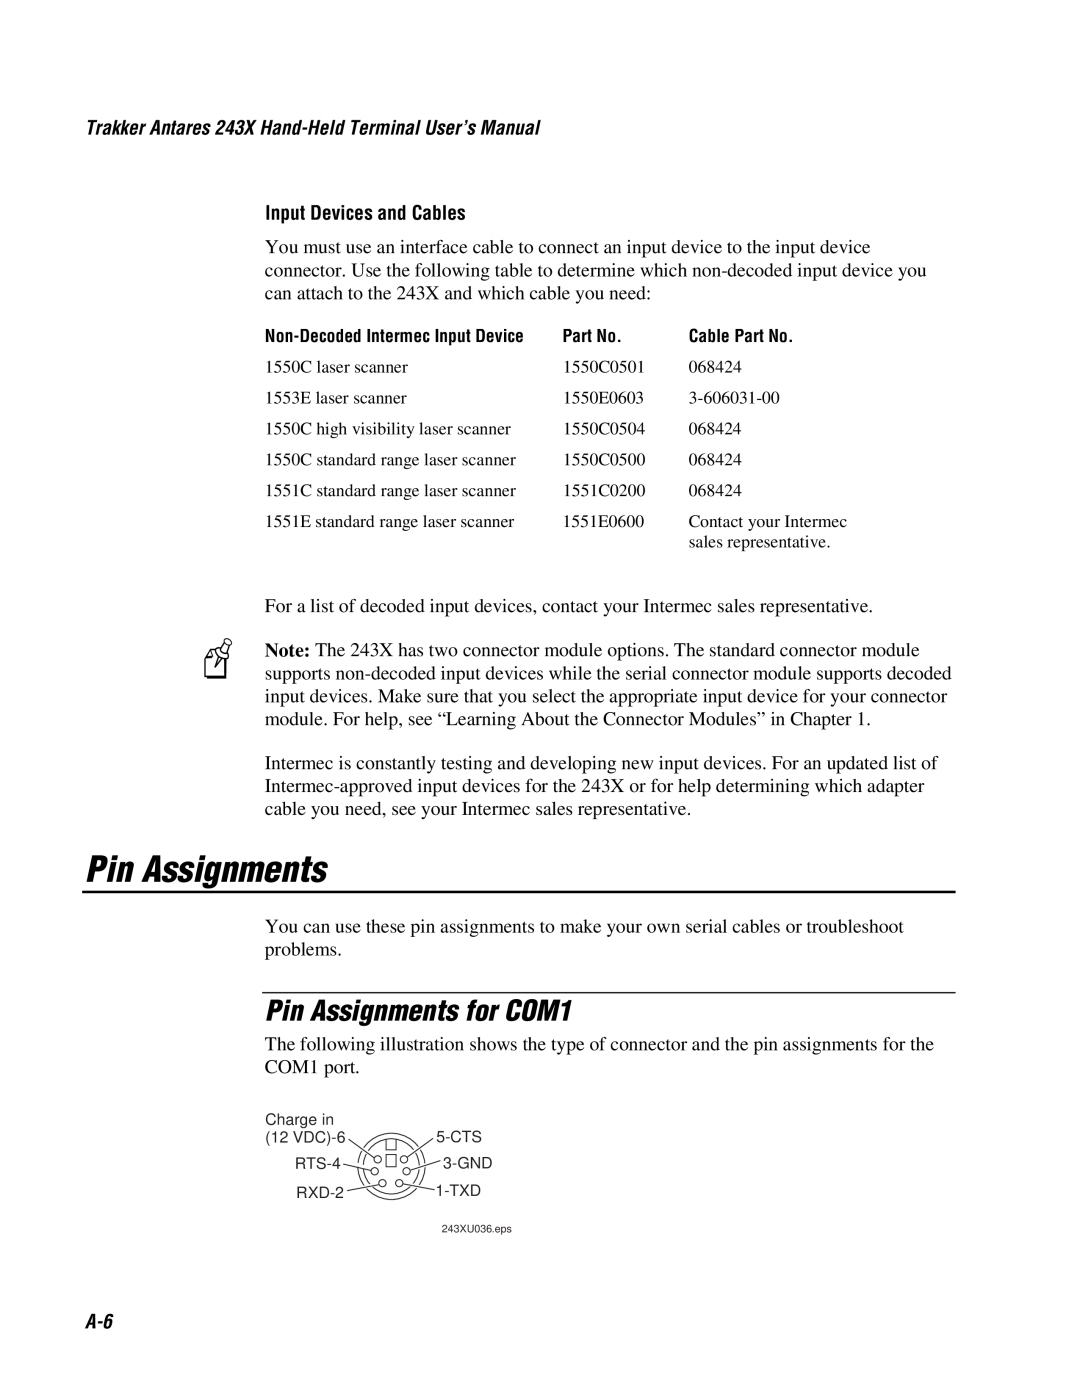 IBM Pin Assignments for COM1, Input Devices and Cables, Trakker Antares 243X Hand-Held Terminal User’s Manual 